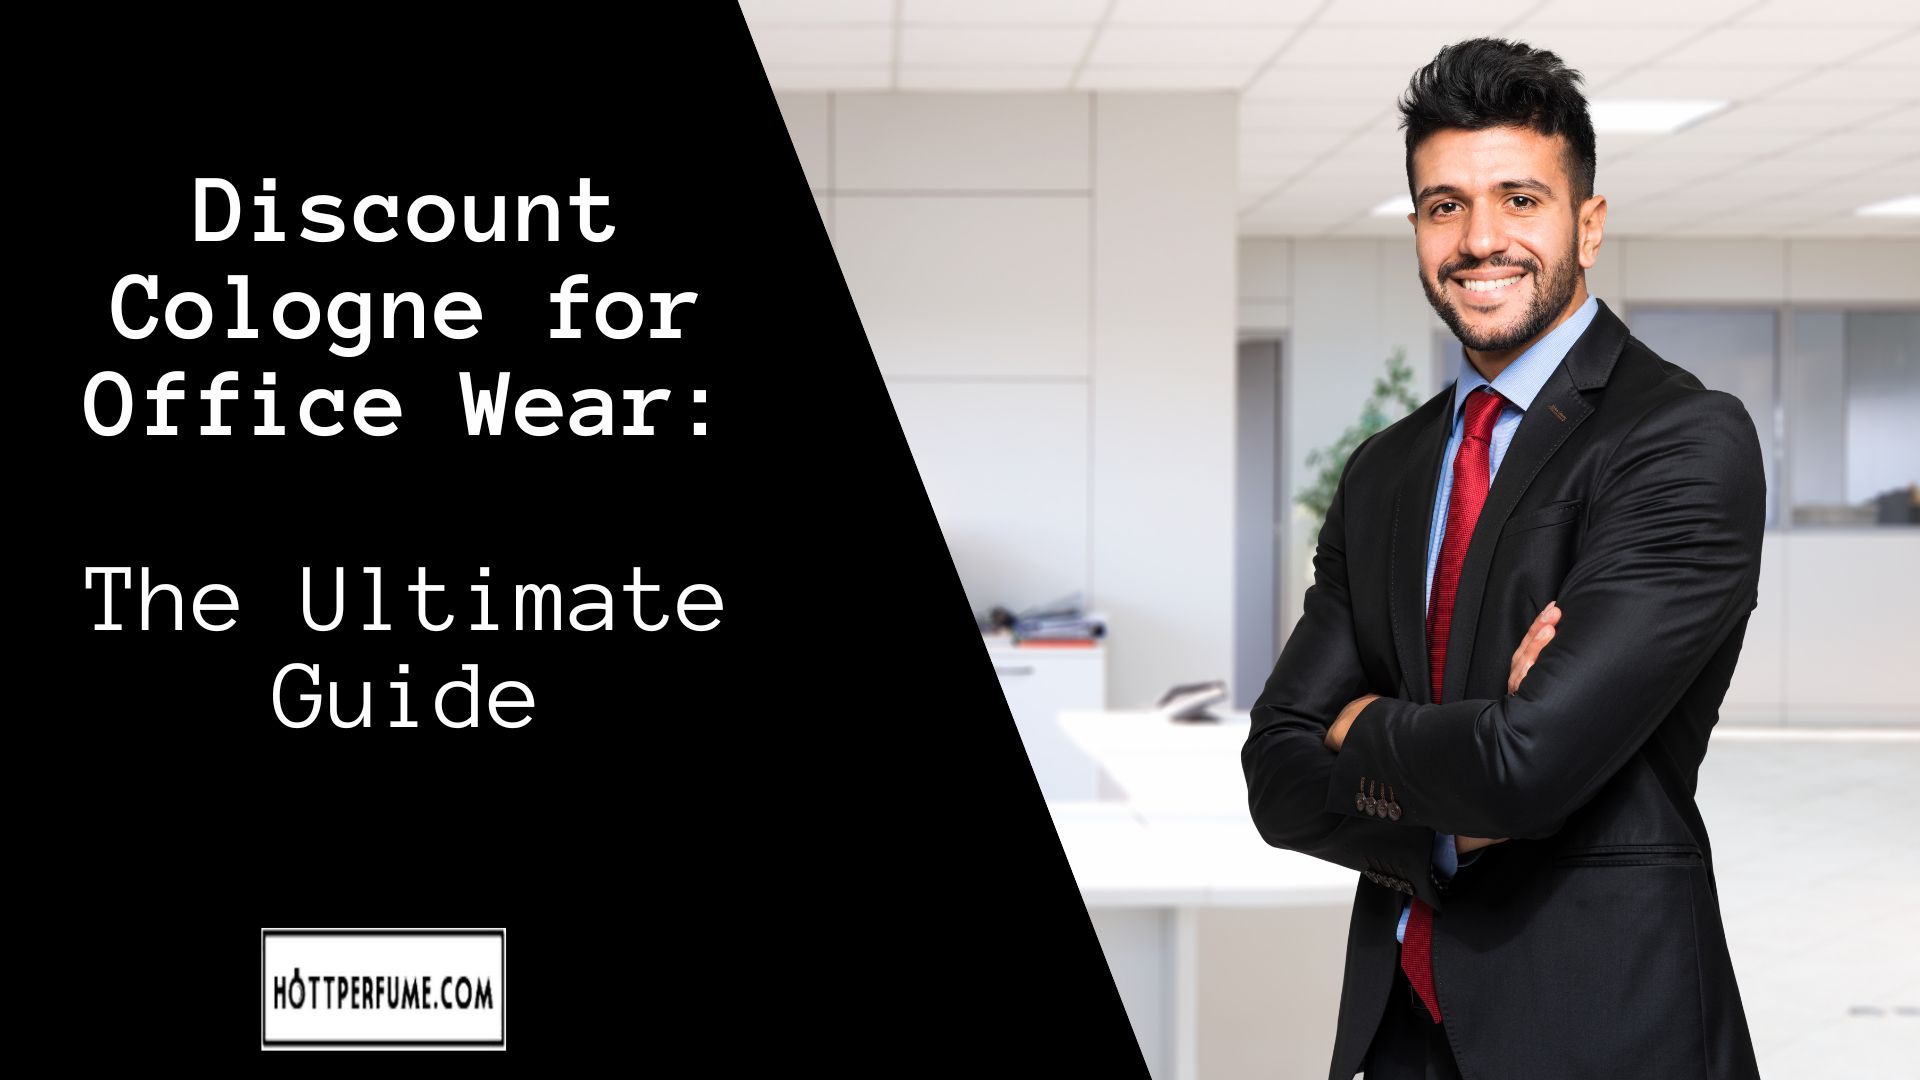 Discount Cologne for Office Wear The Ultimate Guide